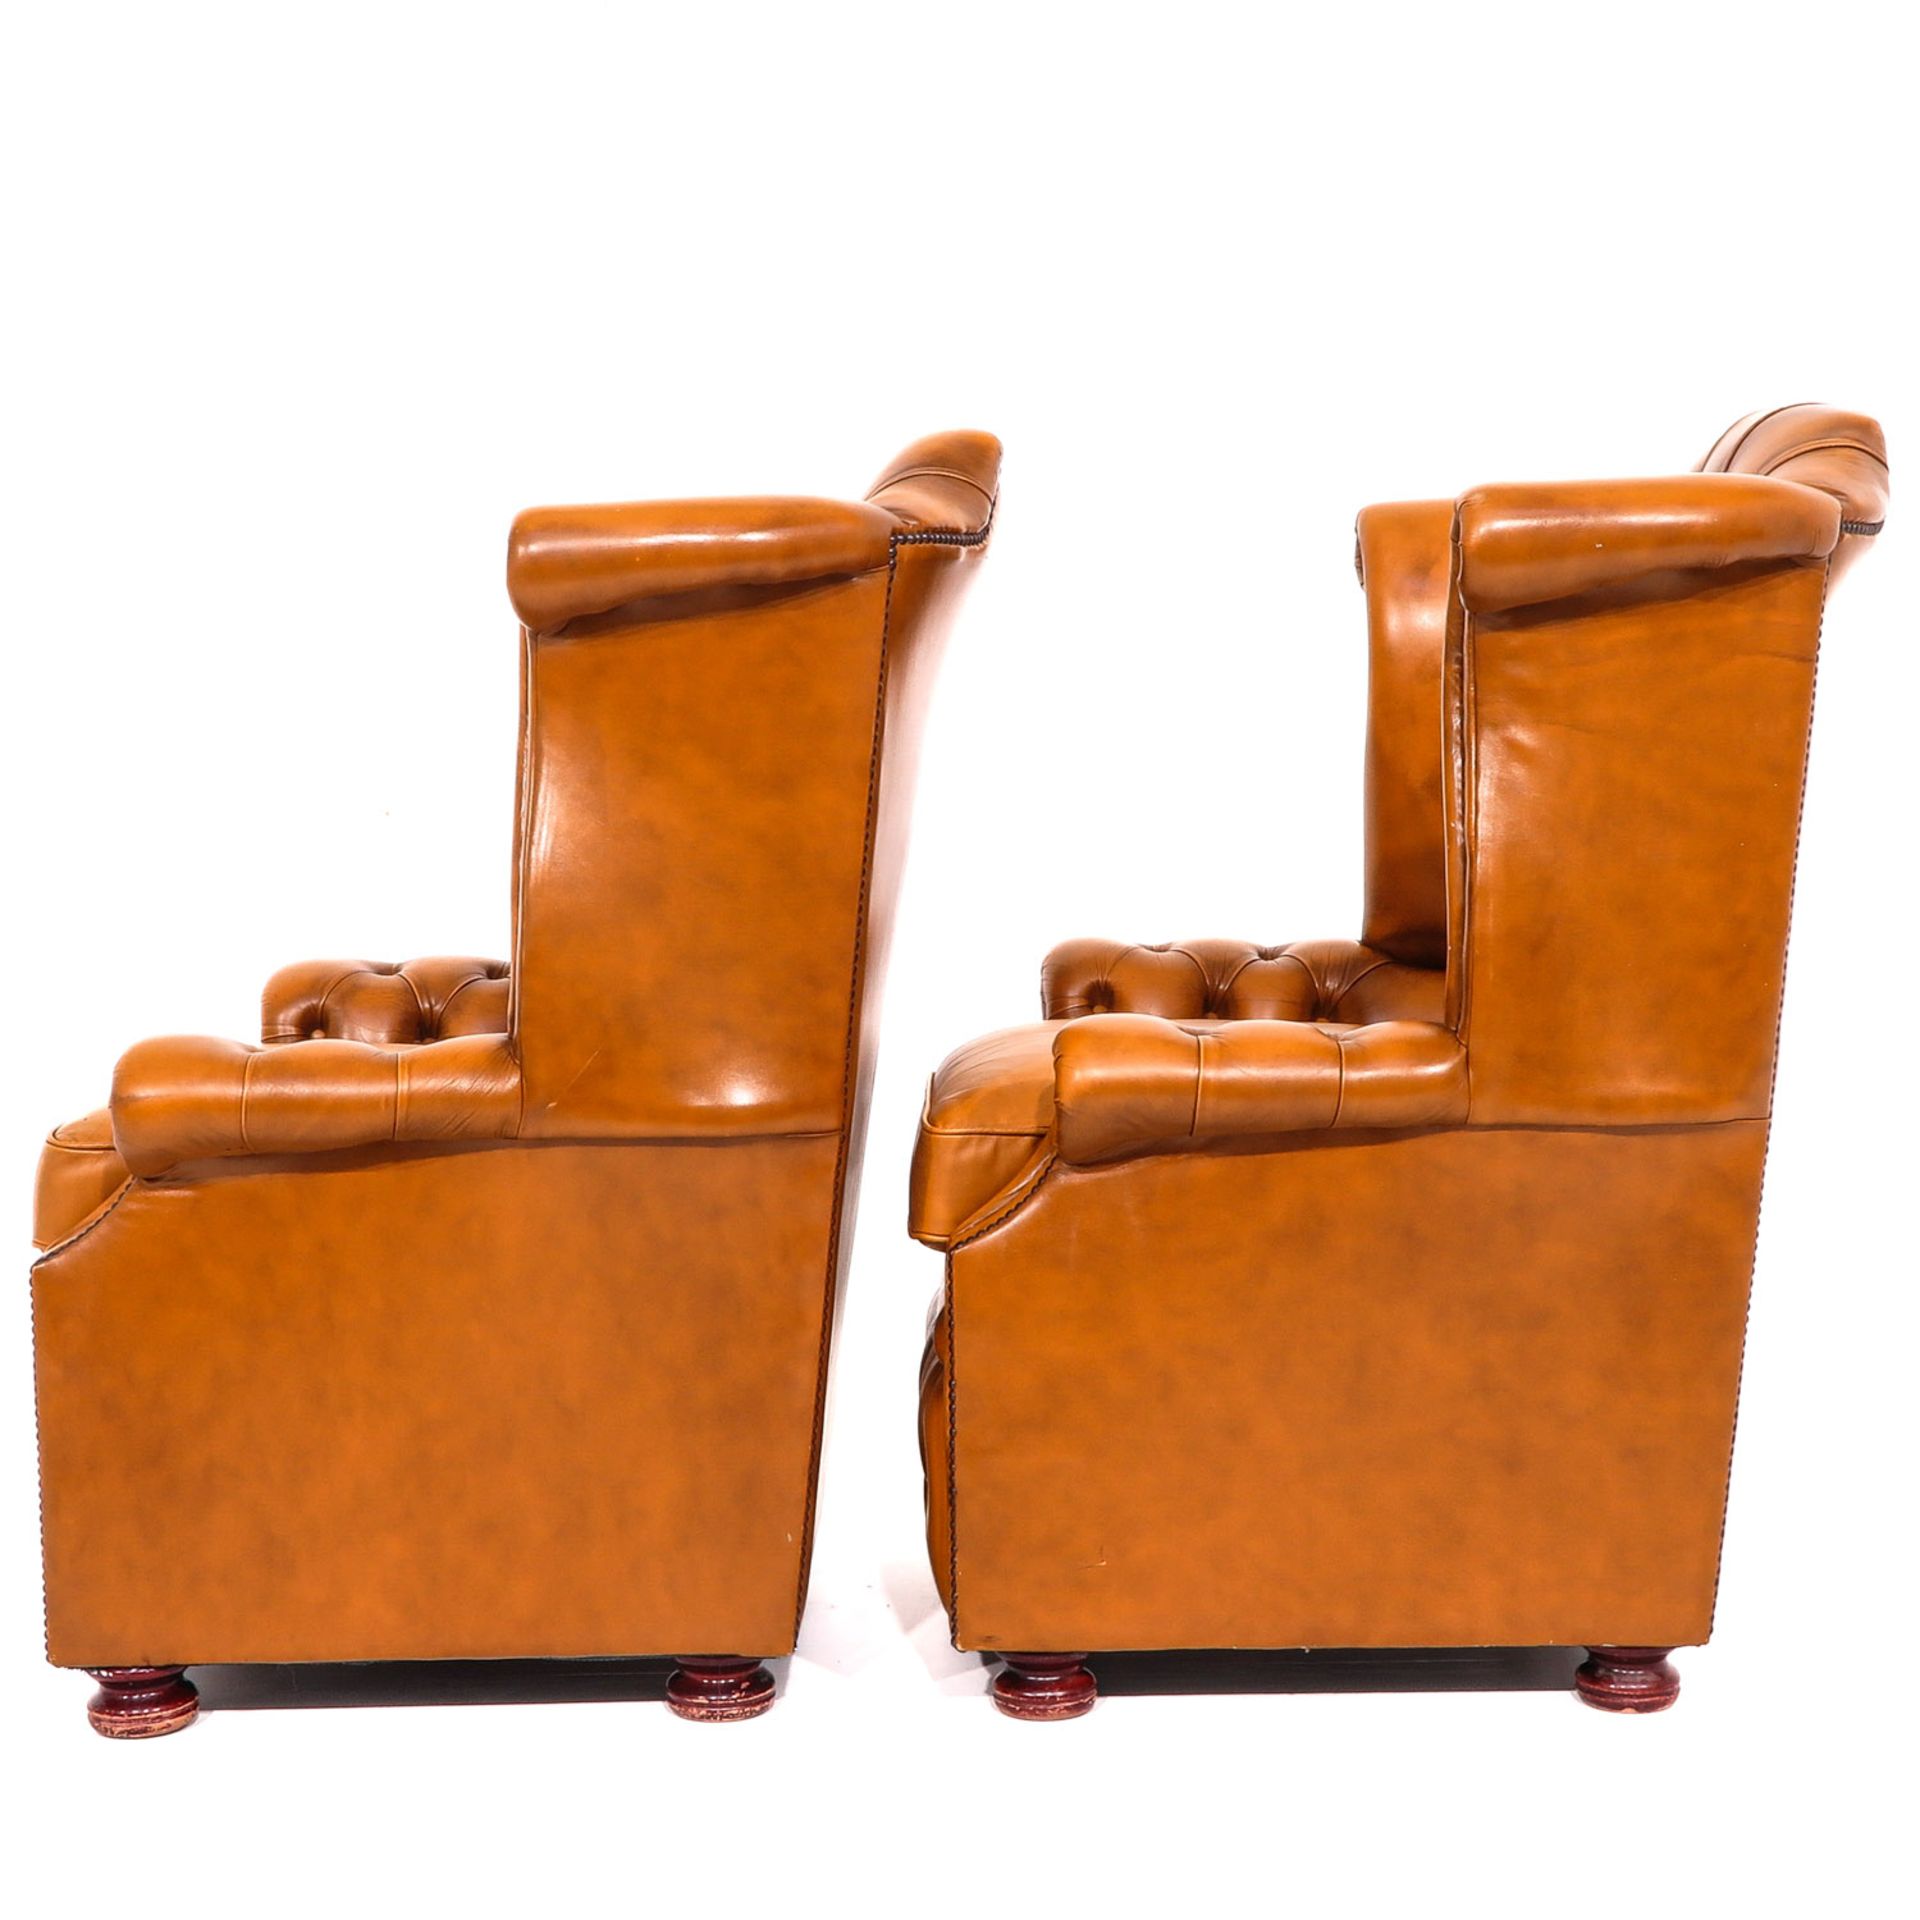 A Pair of Springvale English Chesterfield Chairs - Image 2 of 10